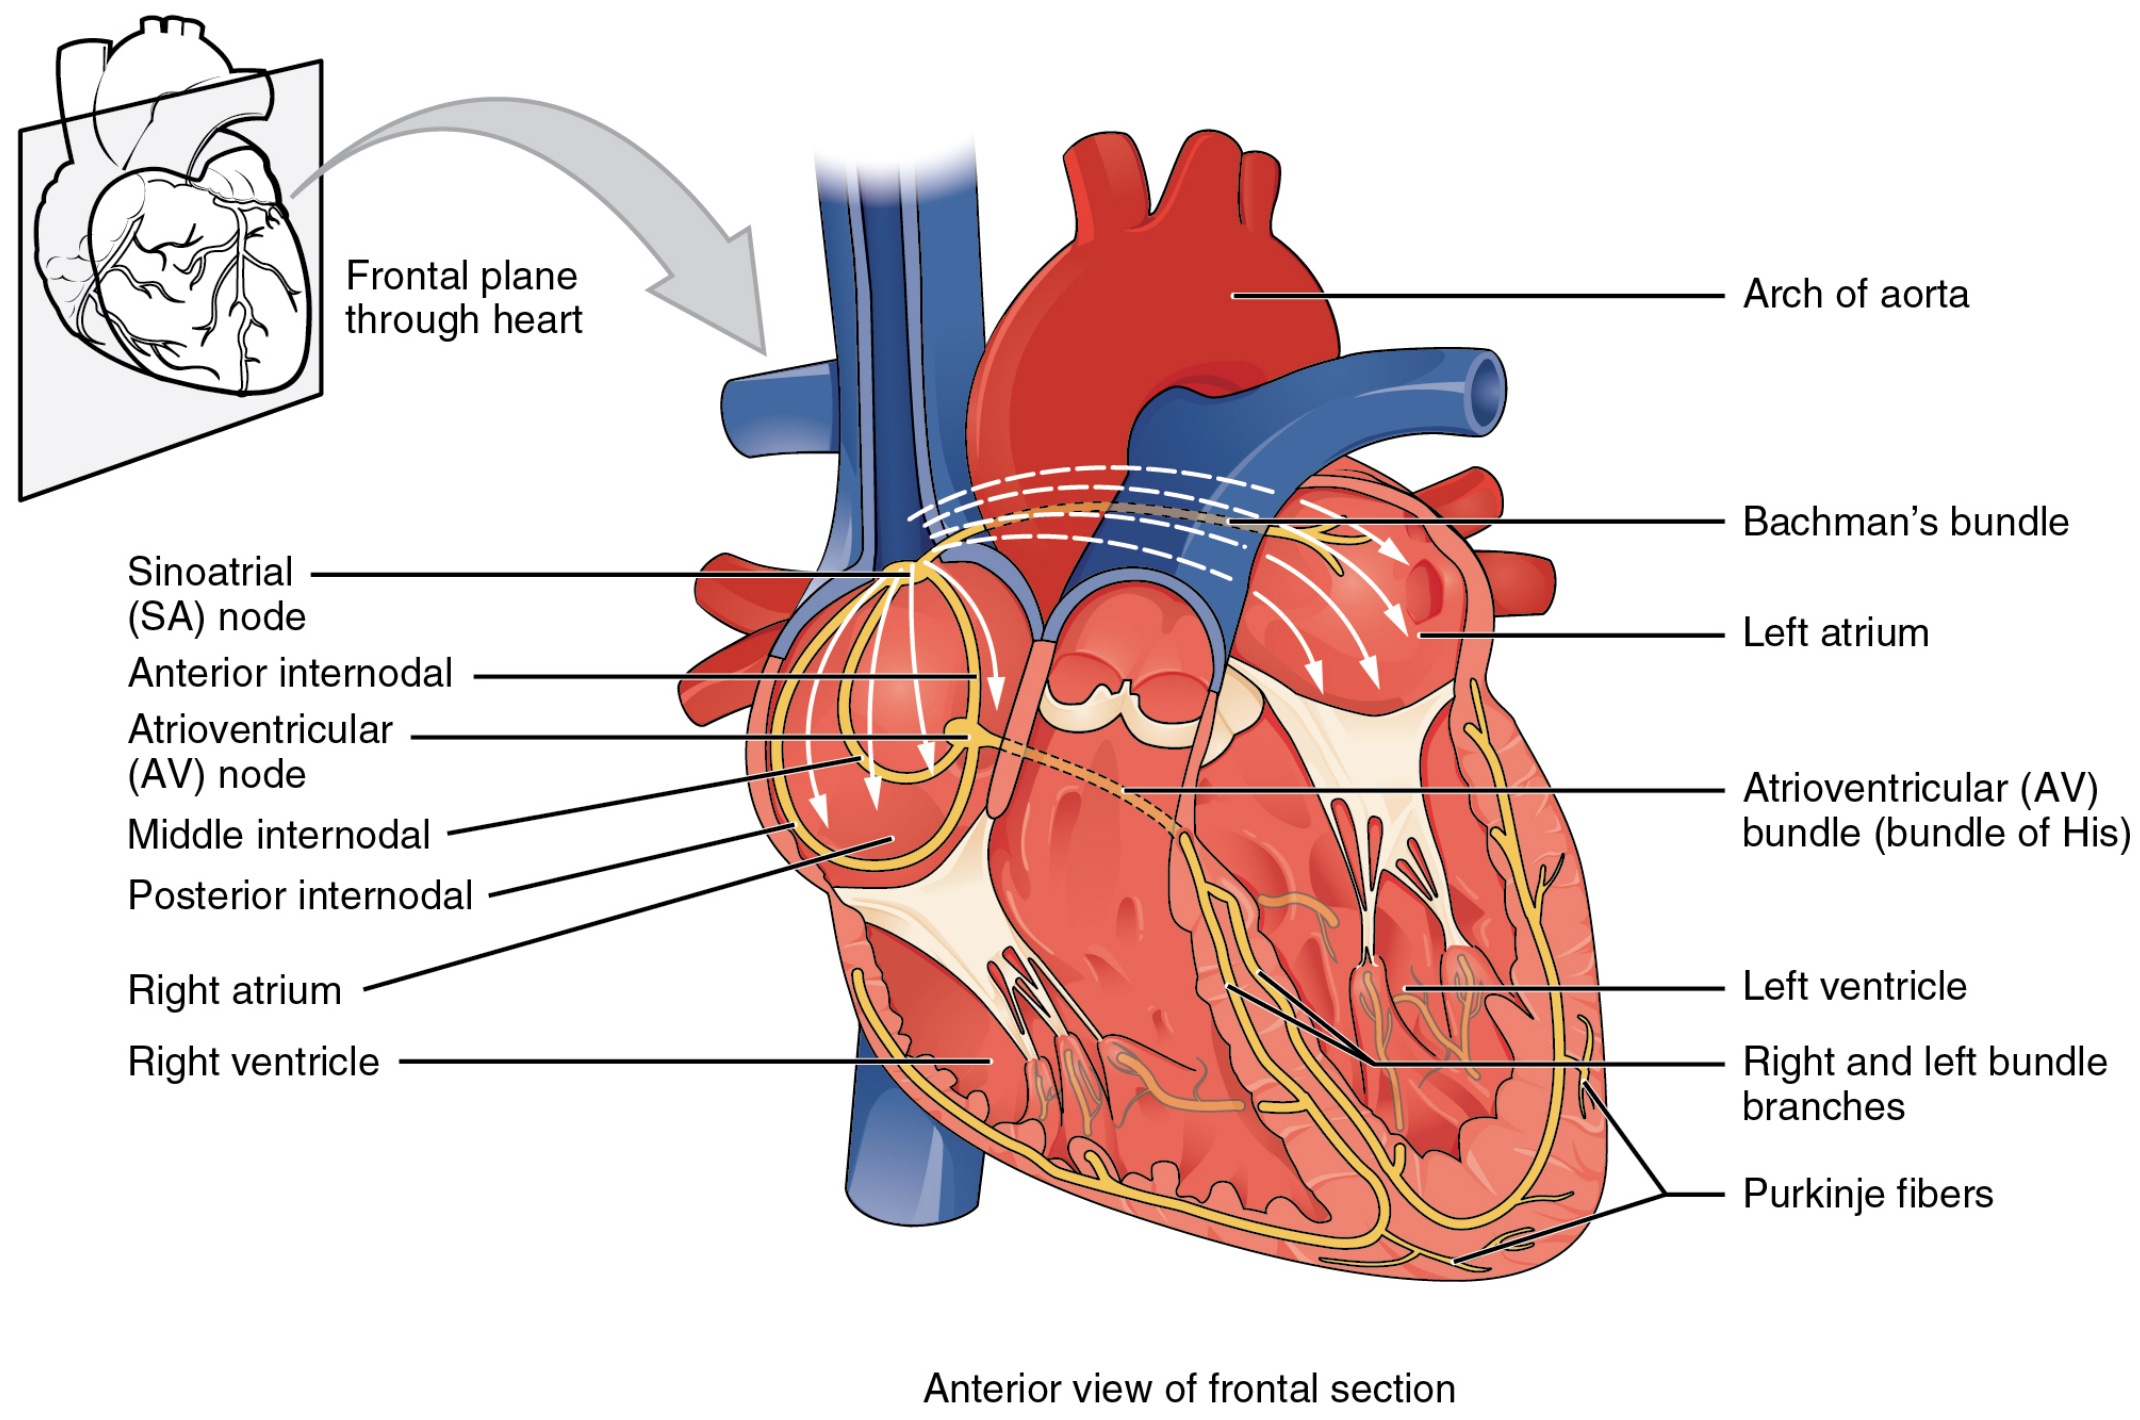 A labeled diagram of the heart illustrated in the frontal plane. The diagram lists the four chambers of the heart; right and left atria and the right and left ventricles. The key structures involved in the electrical conductance of the heart are also labeled. The ordered pathway of depolarization is emphasized; Sinoatrial node, Atrioventricular node, Bundle of His, and the Purkinje Fibers.